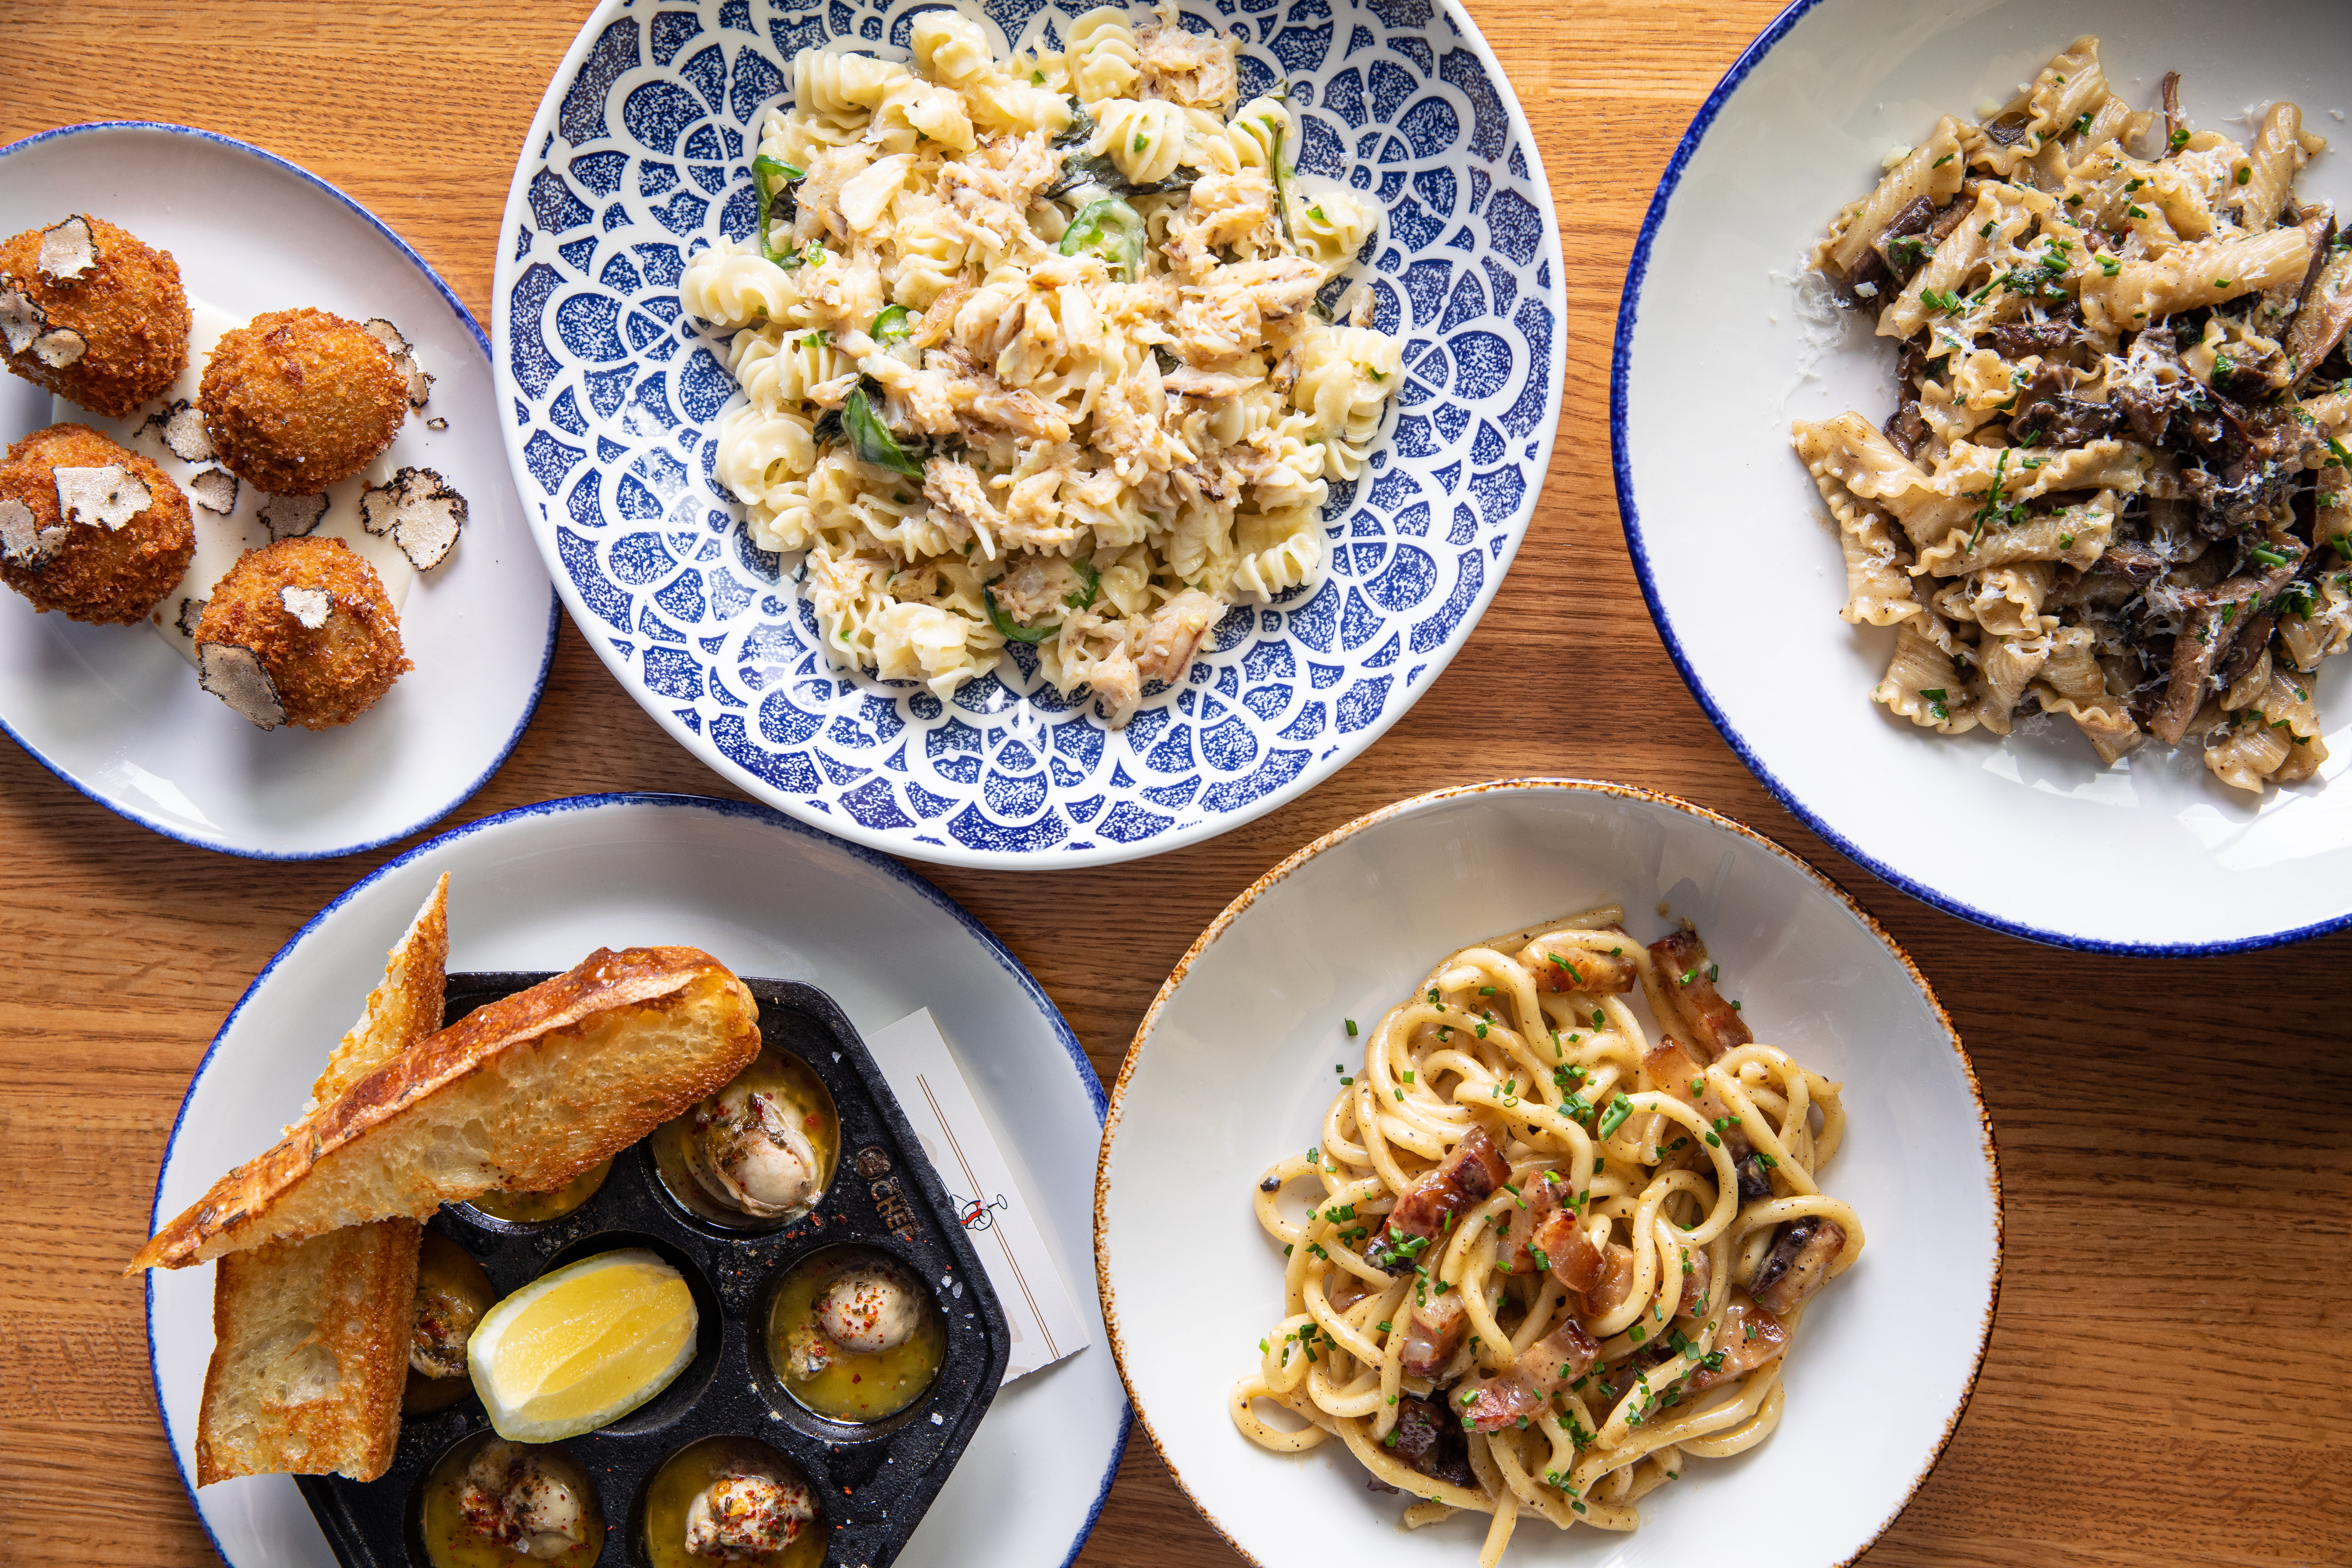 Overhead view of plates of arancini, radiatori pasta, campanelle pasta, six oysters in a cast-iron oyster plate, and bigoli pasta.